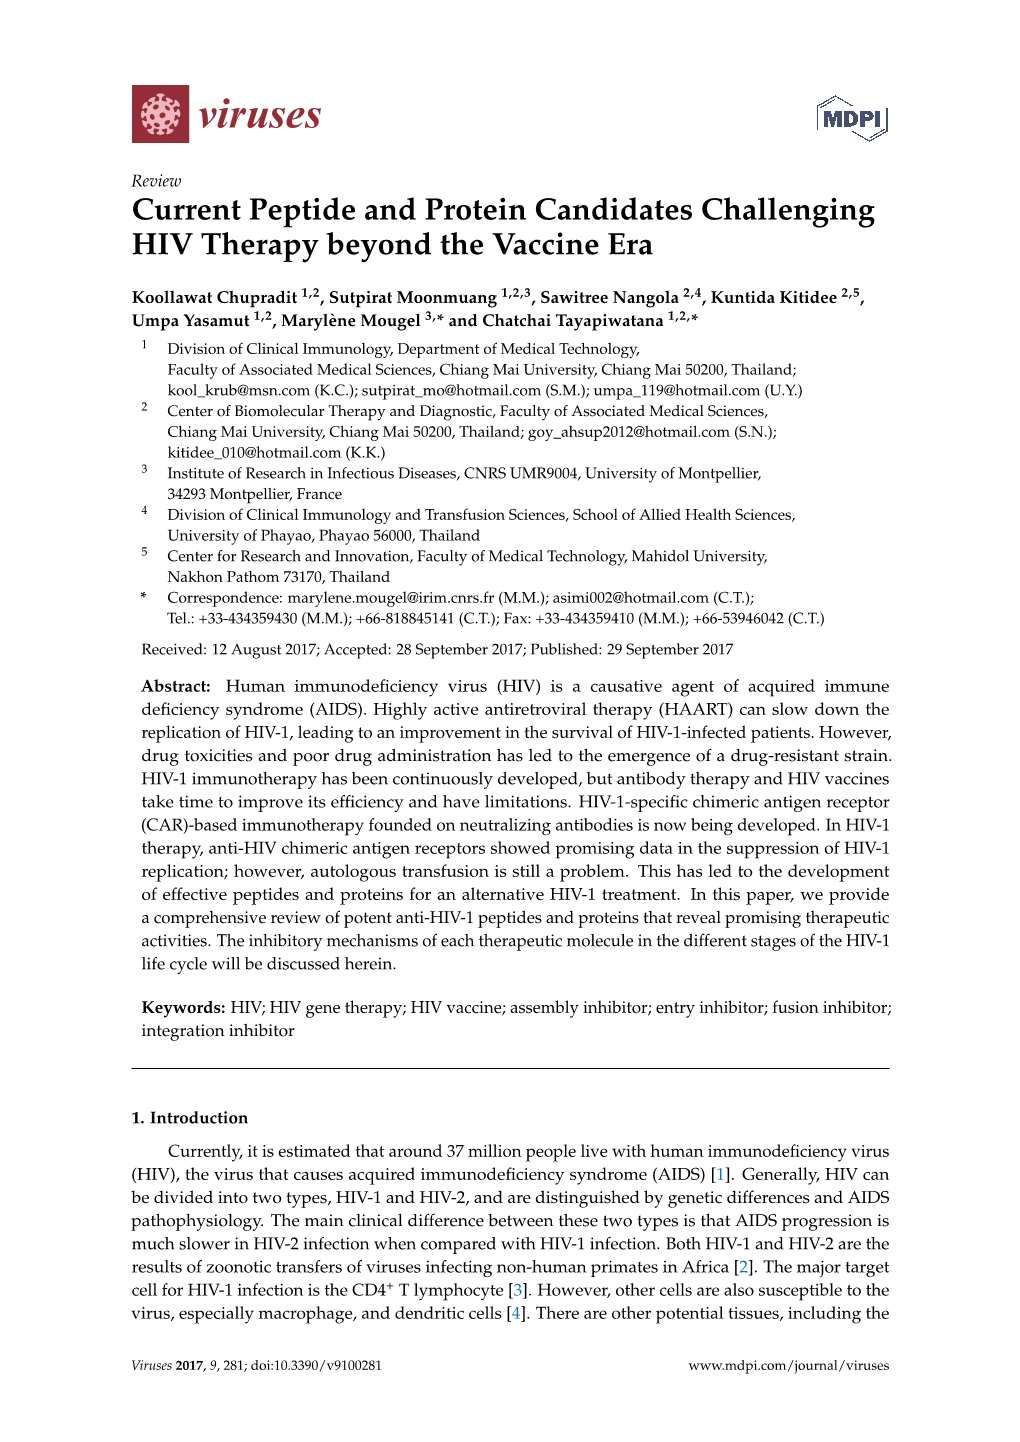 Current Peptide and Protein Candidates Challenging HIV Therapy Beyond the Vaccine Era